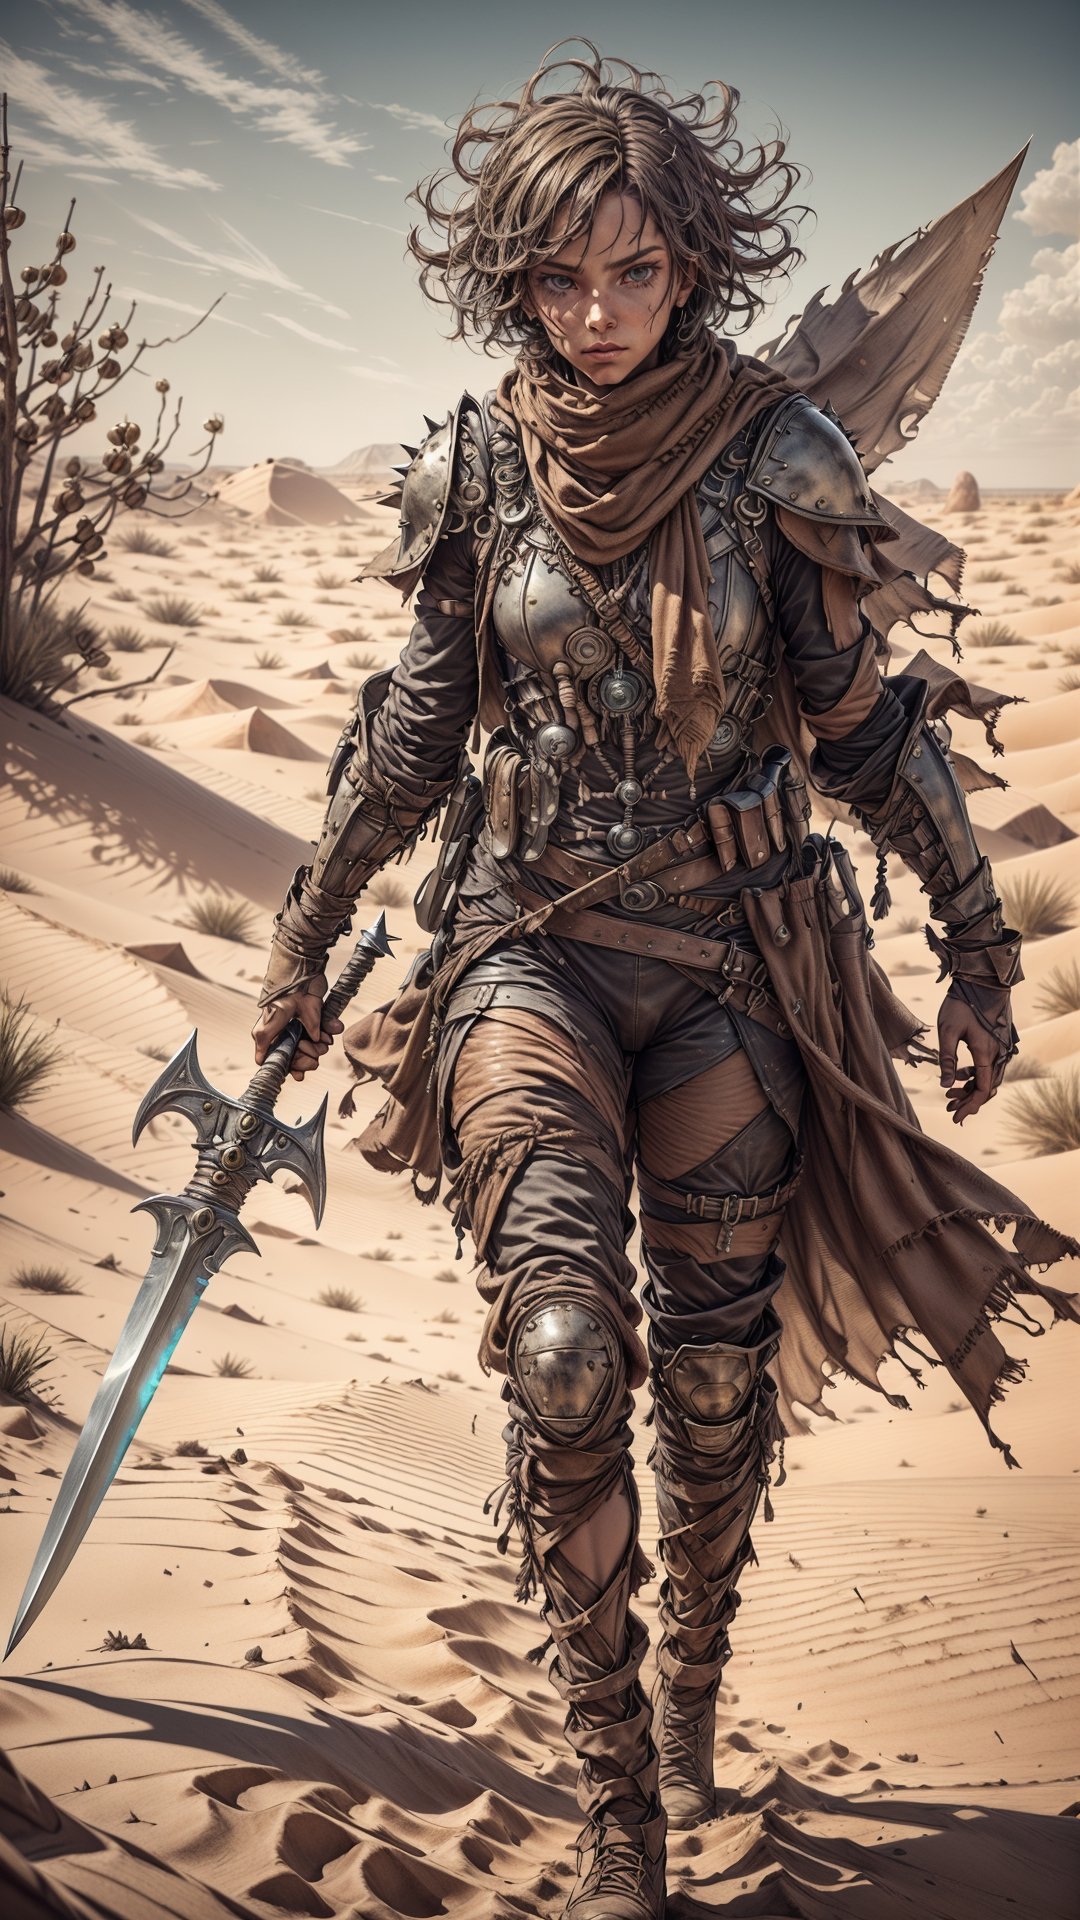 (4k), (masterpiece), (best quality),(extremely intricate), (realistic), (sharp focus), (cinematic lighting), (extremely detailed), 

A young girl dune warrior named Zora stands tall on a dune, her eyes scanning the horizon for danger. She is wearing a weathered leather armor and a scarf to protect her from the sand and wind. In her hands, she wields a spear and a dagger. Zora is ready to face any challenge that comes her way.

,davincitech,Des3rt4rmor